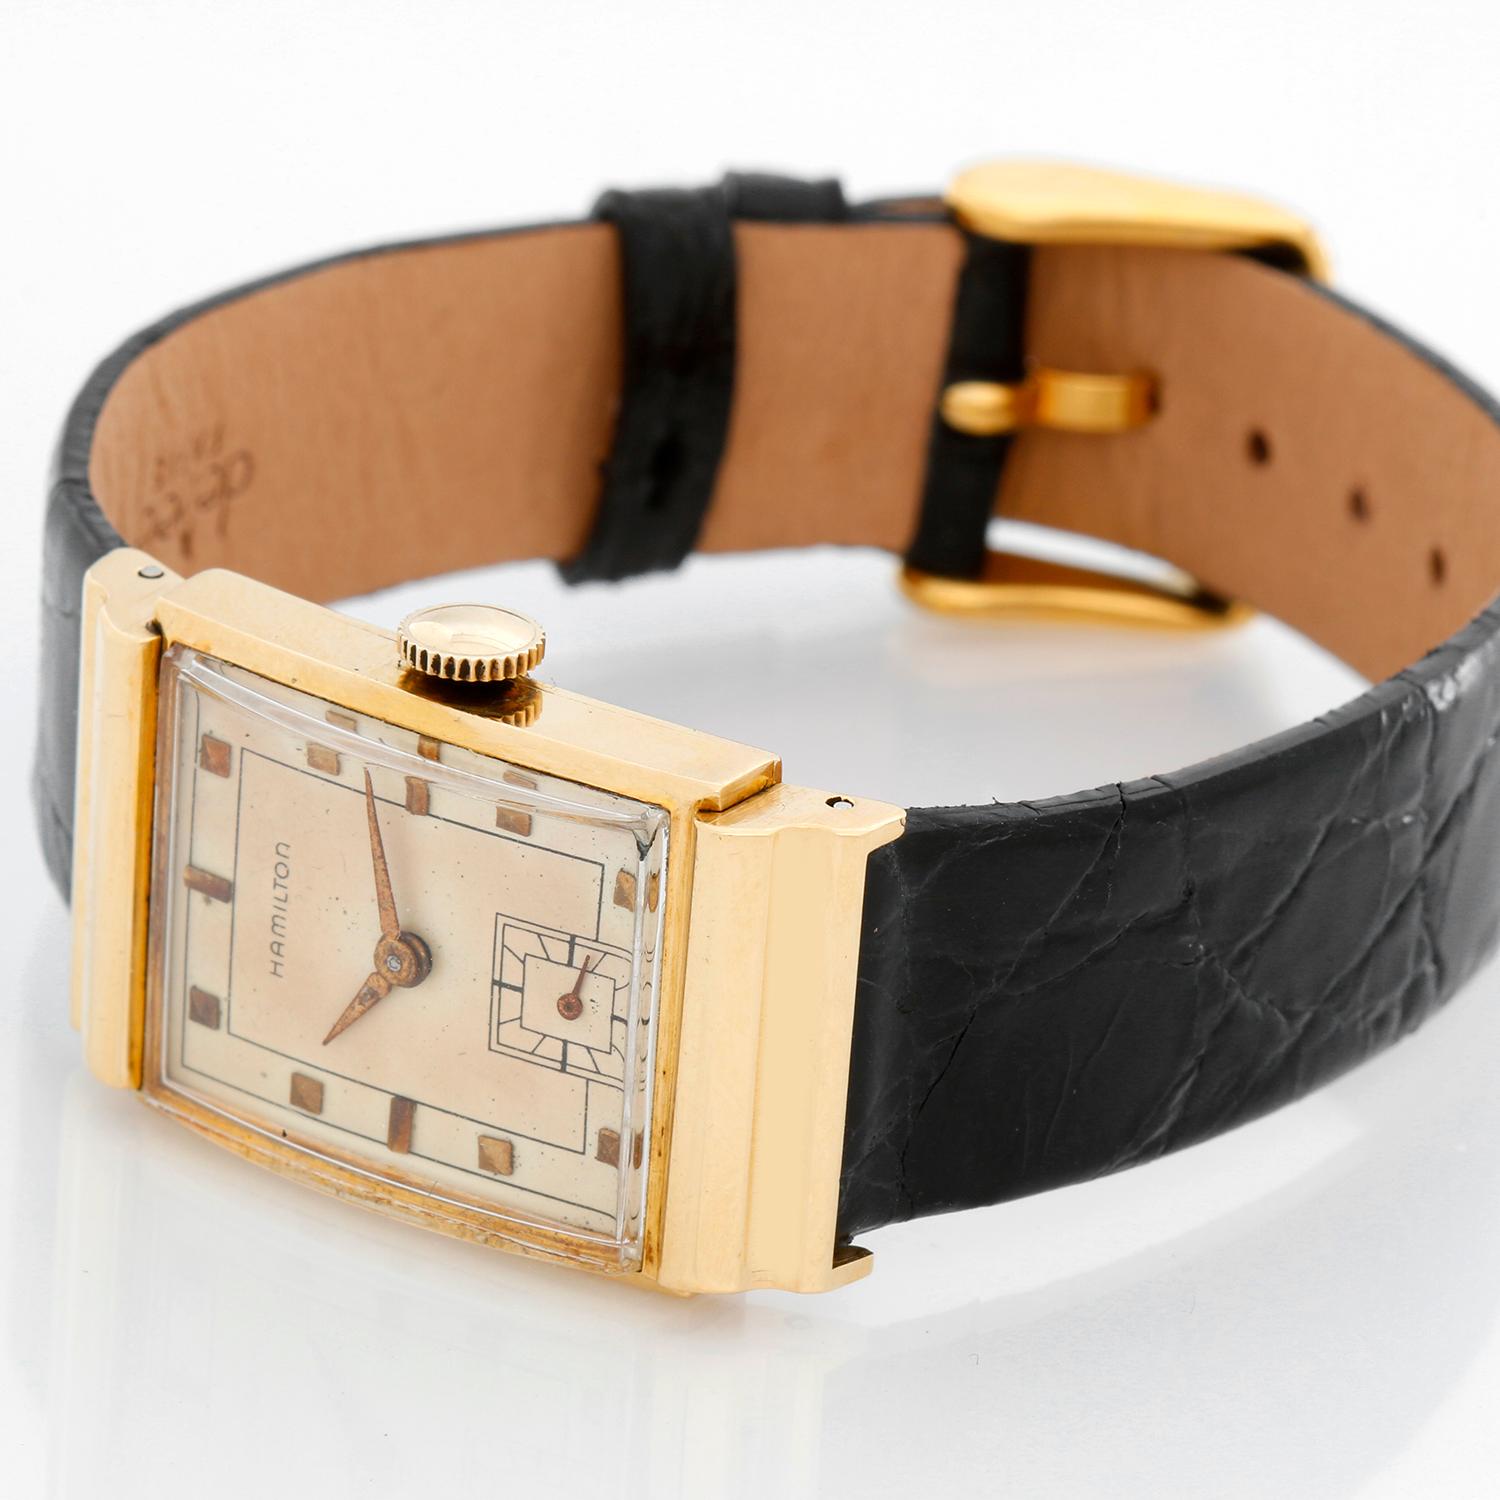 Hamilton Gordon 18k Yellow Gold  Watch - Manual. 18K yellow gold ( 22 x 36 mm ). Nicely patina silver dial with raised gold hour markers. Black strap with tang buckle. Very rare and collectible, one of the few vintage American watches made in 18K.